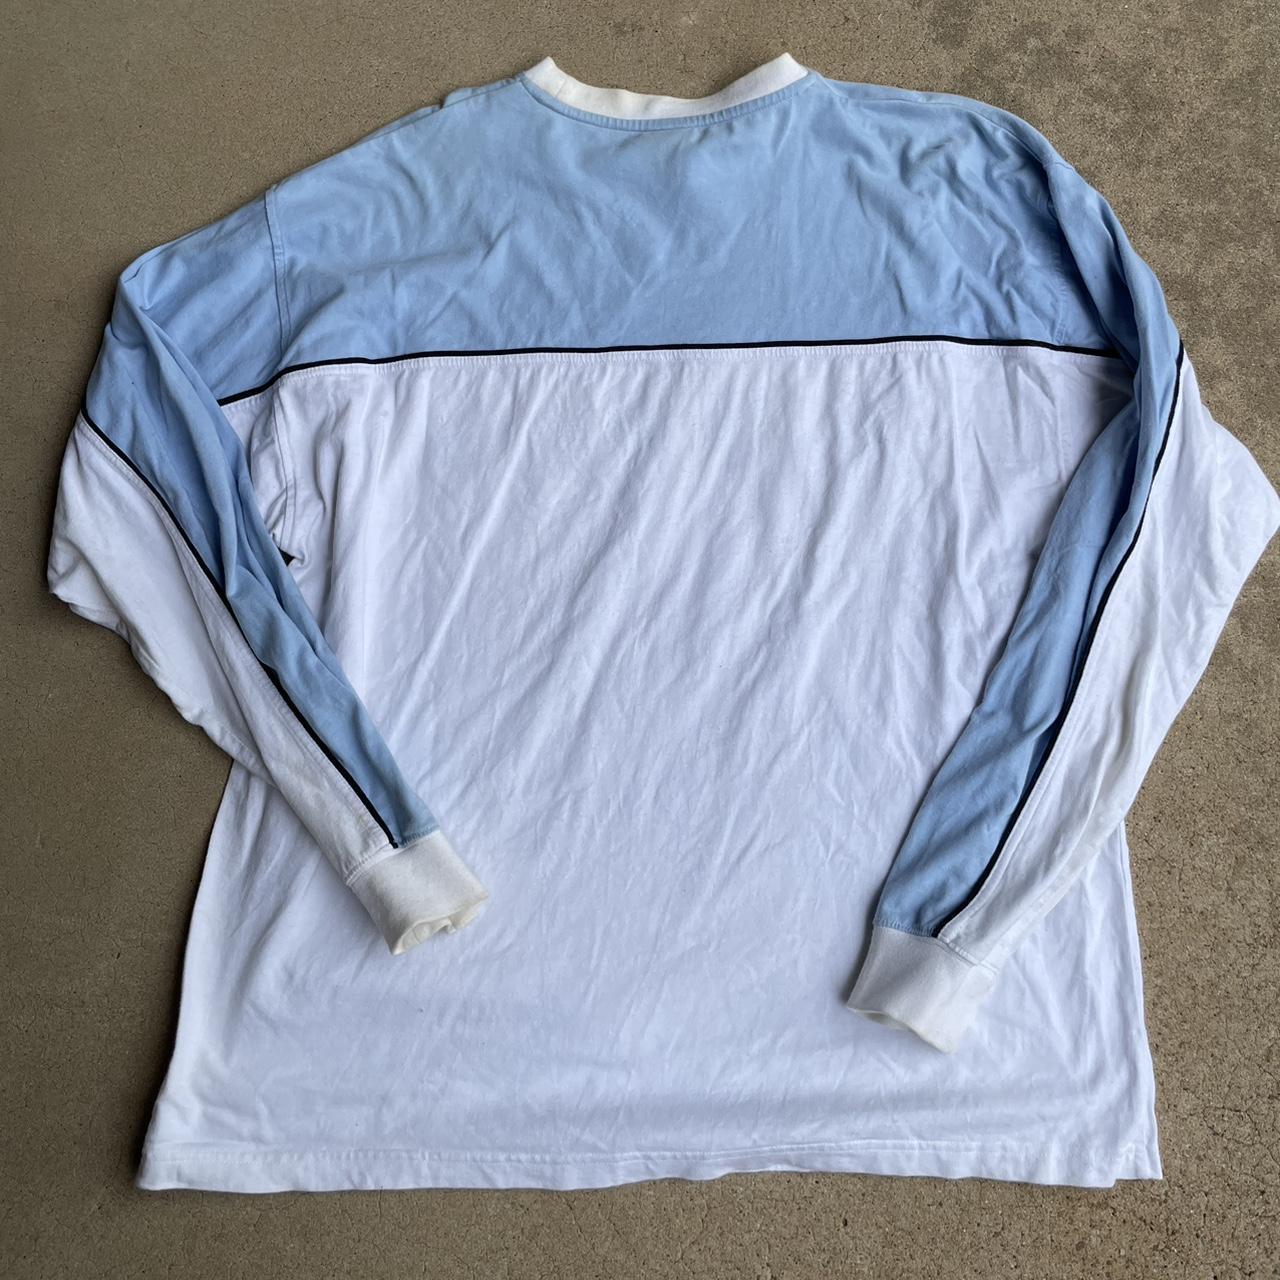 Vintage Y2K SouthPole Spell Out Long Sleeve Blue... - Depop